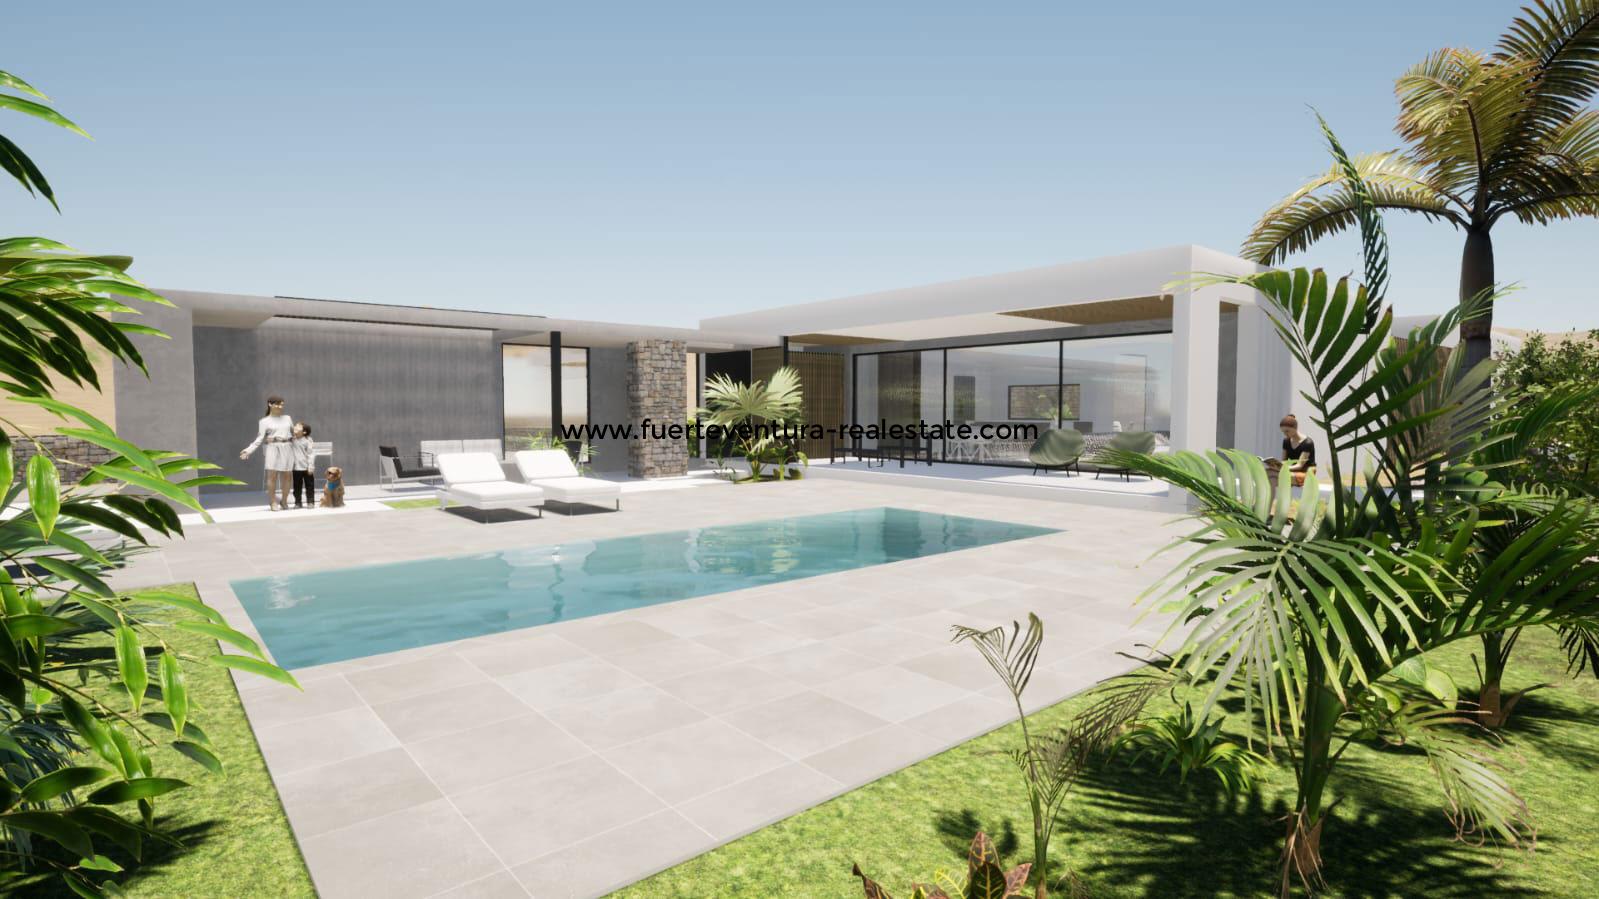   Modern villa with pool under construction in Lajares